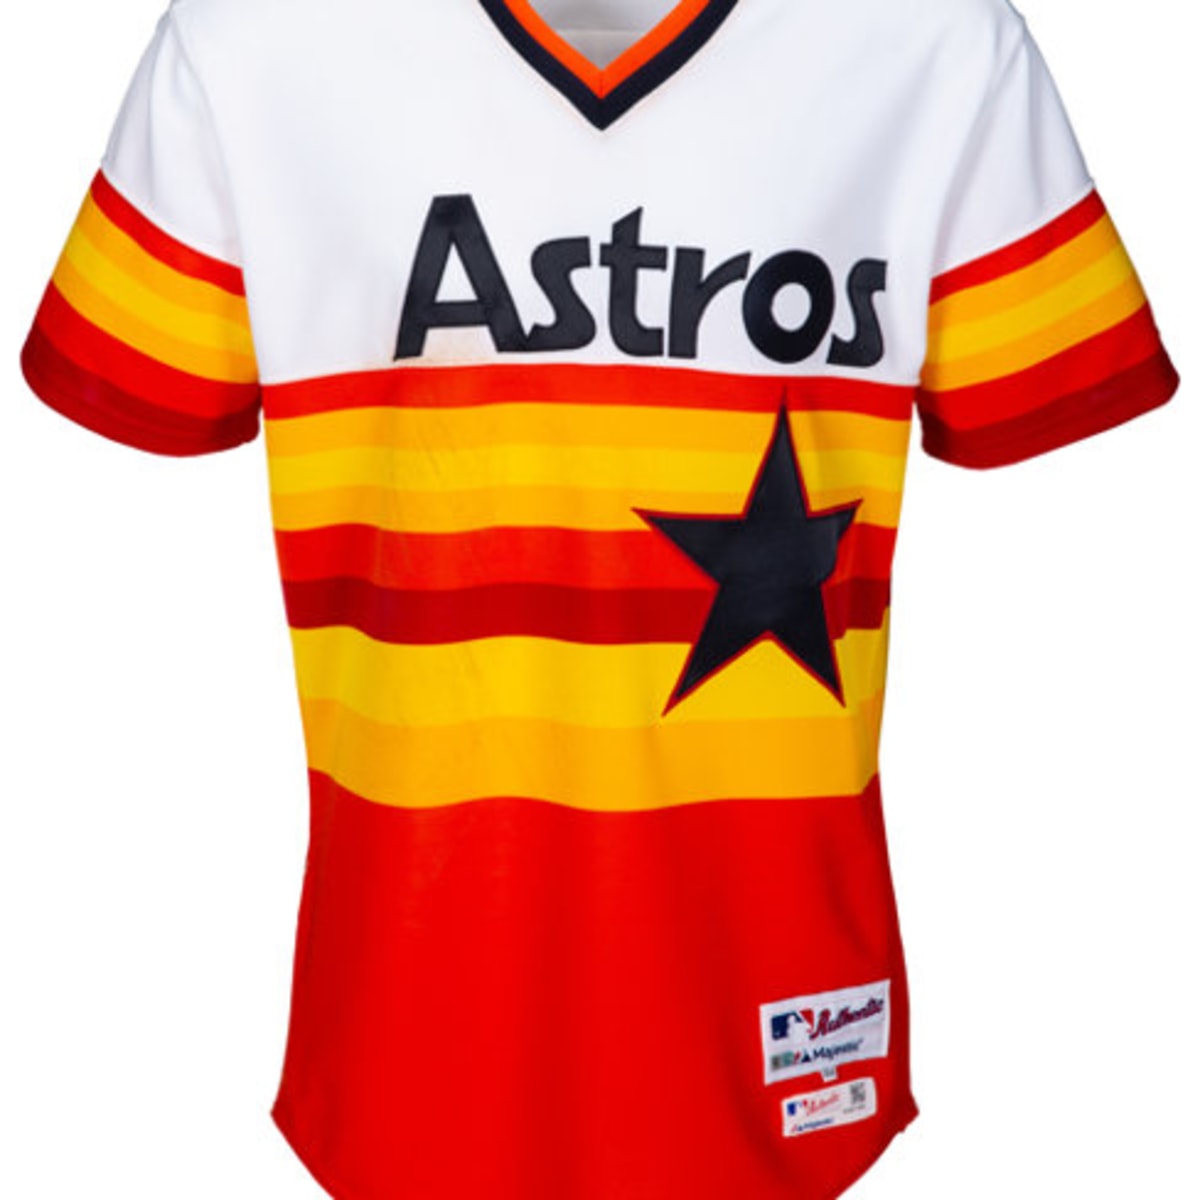 astros jersey cheating